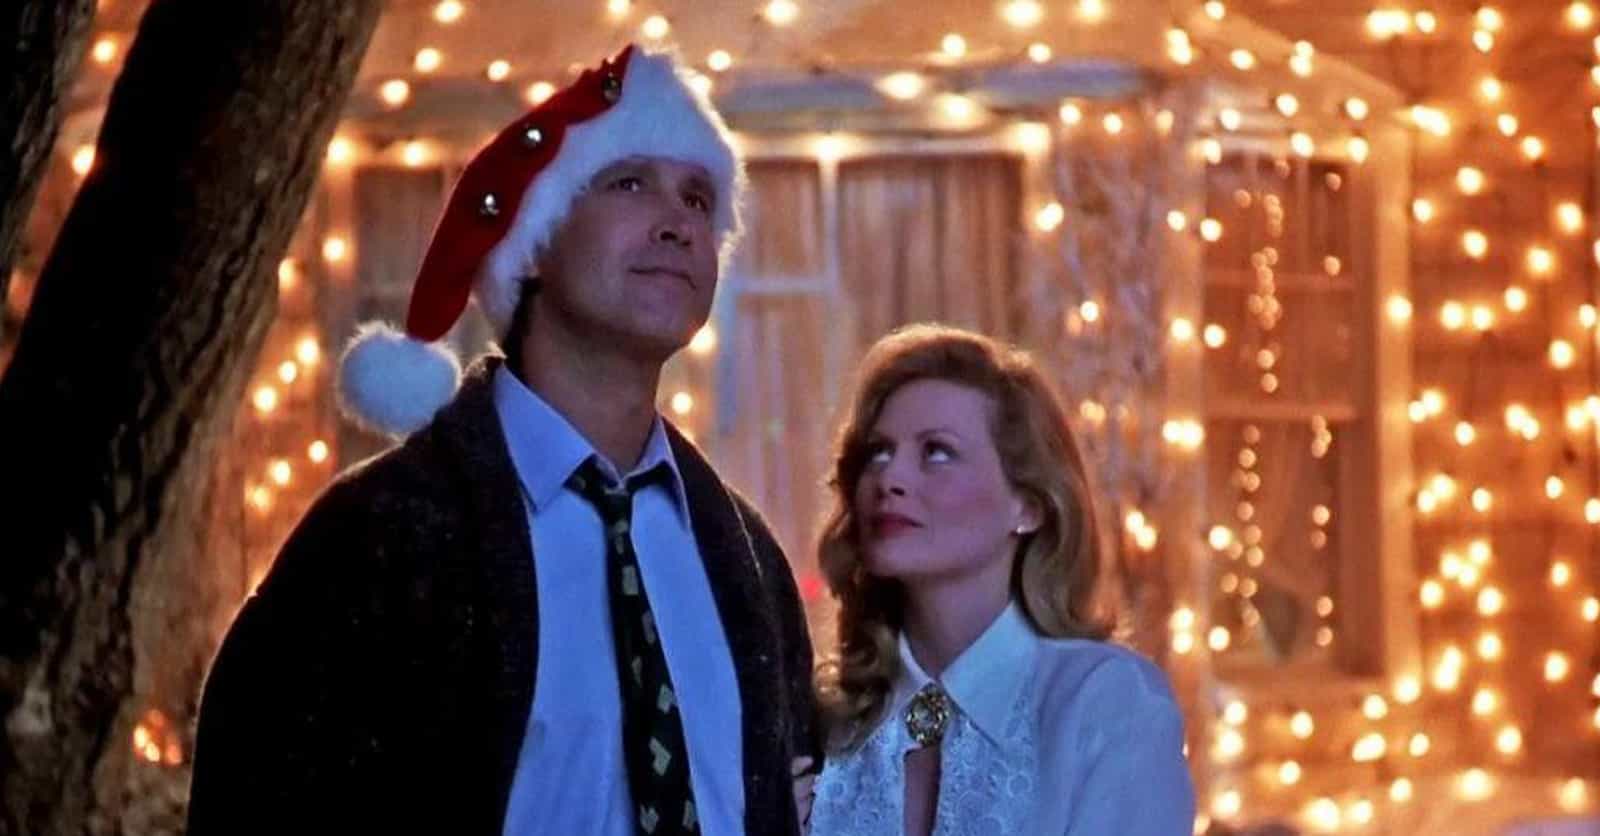 The 15 Tropes That Show Up In Every Christmas Movie